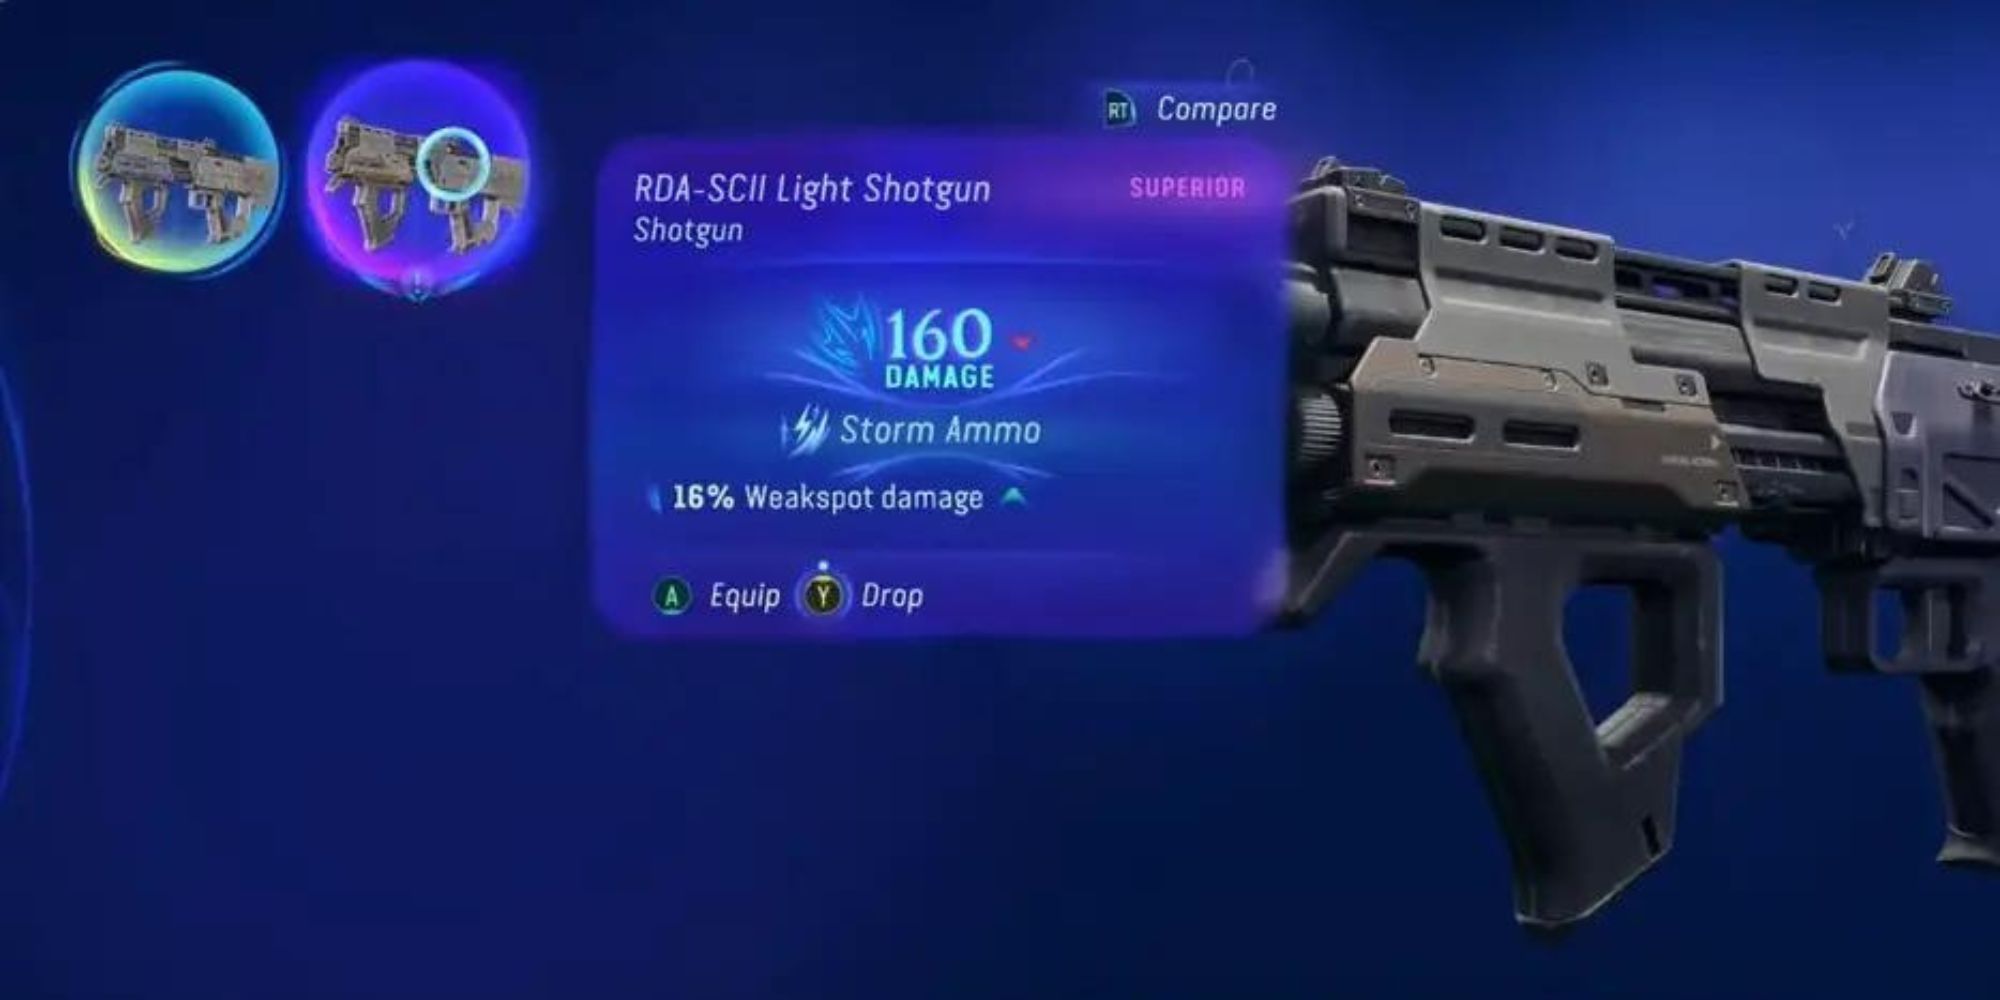 The RDA SCII Light Shotgun in the players inventory